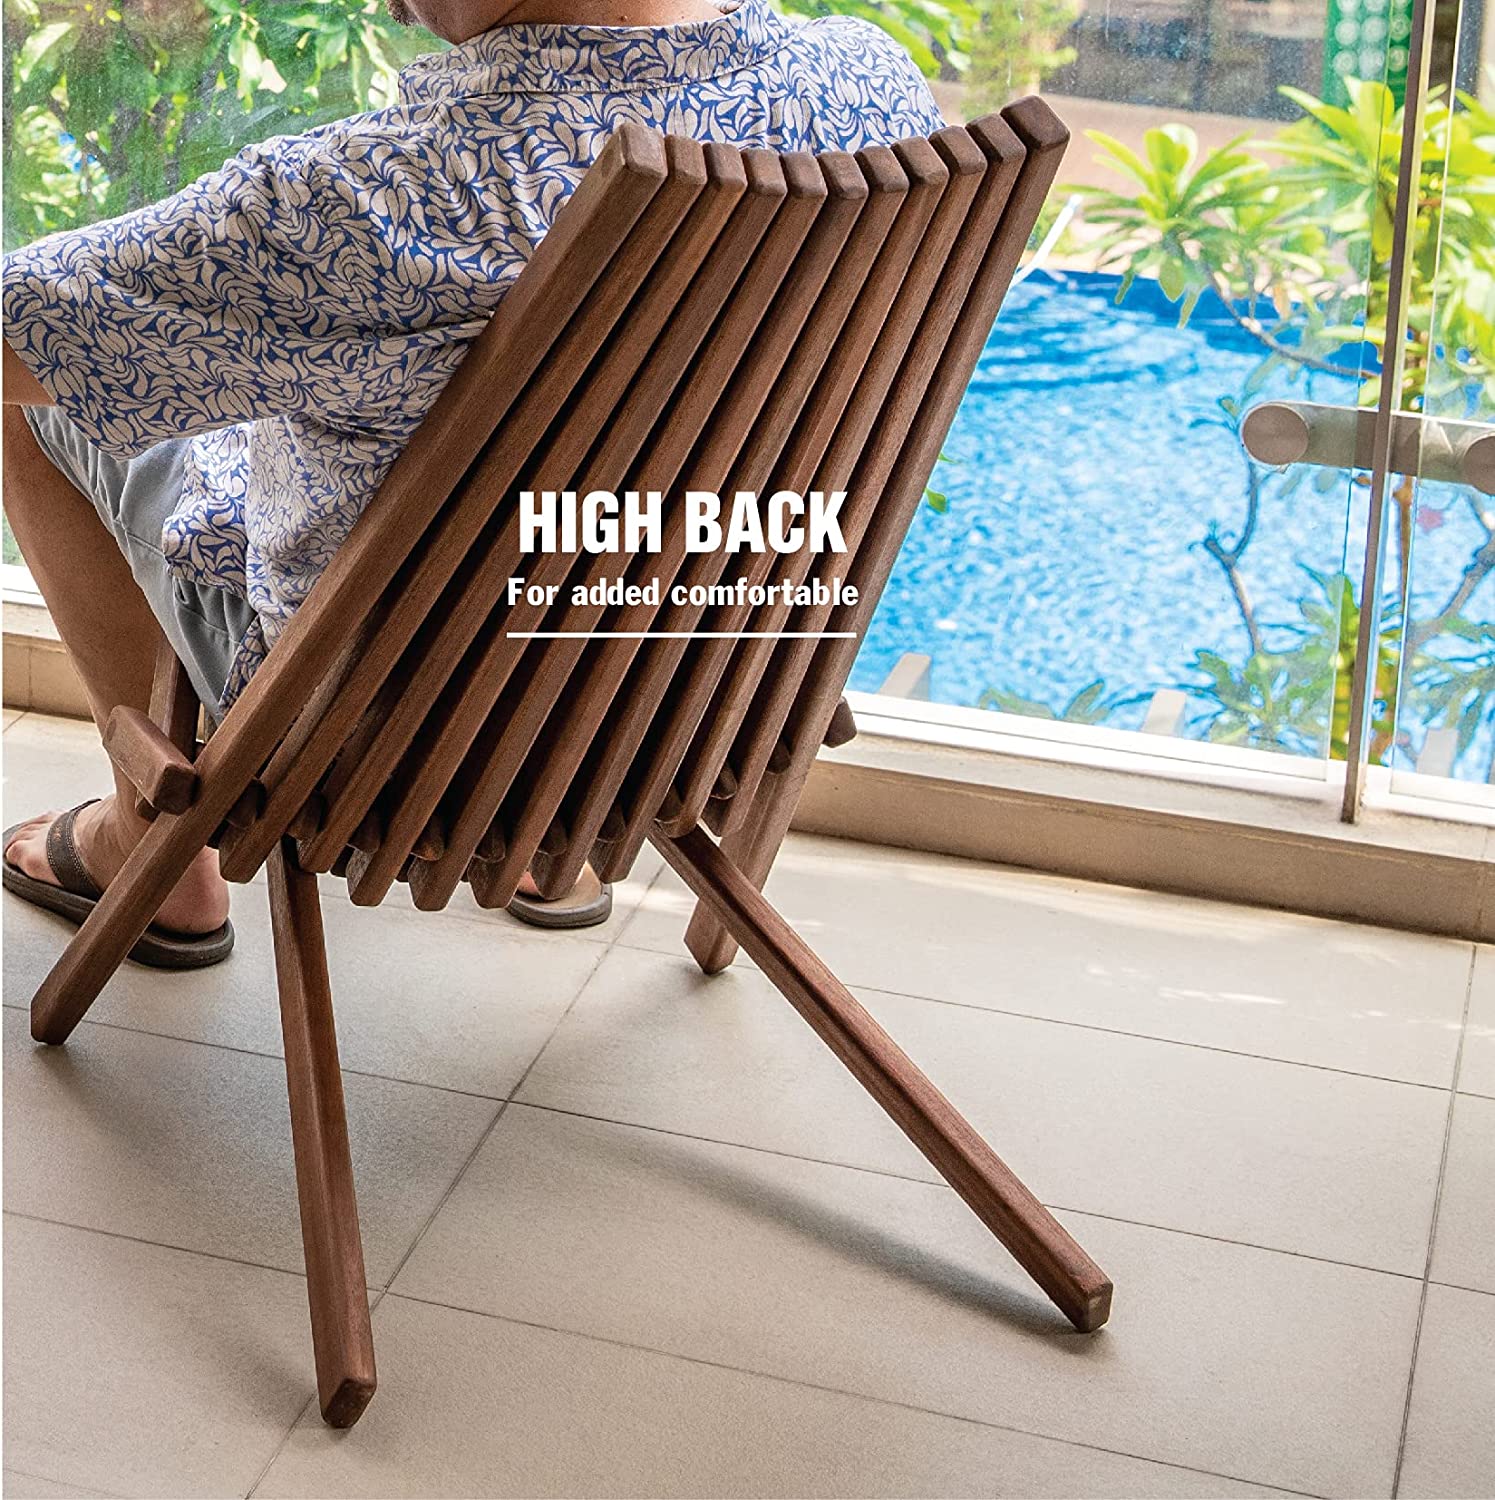 Melino Folding Wooden Outdoor Chairs - Low Profile, Acacia Wood Outdoor